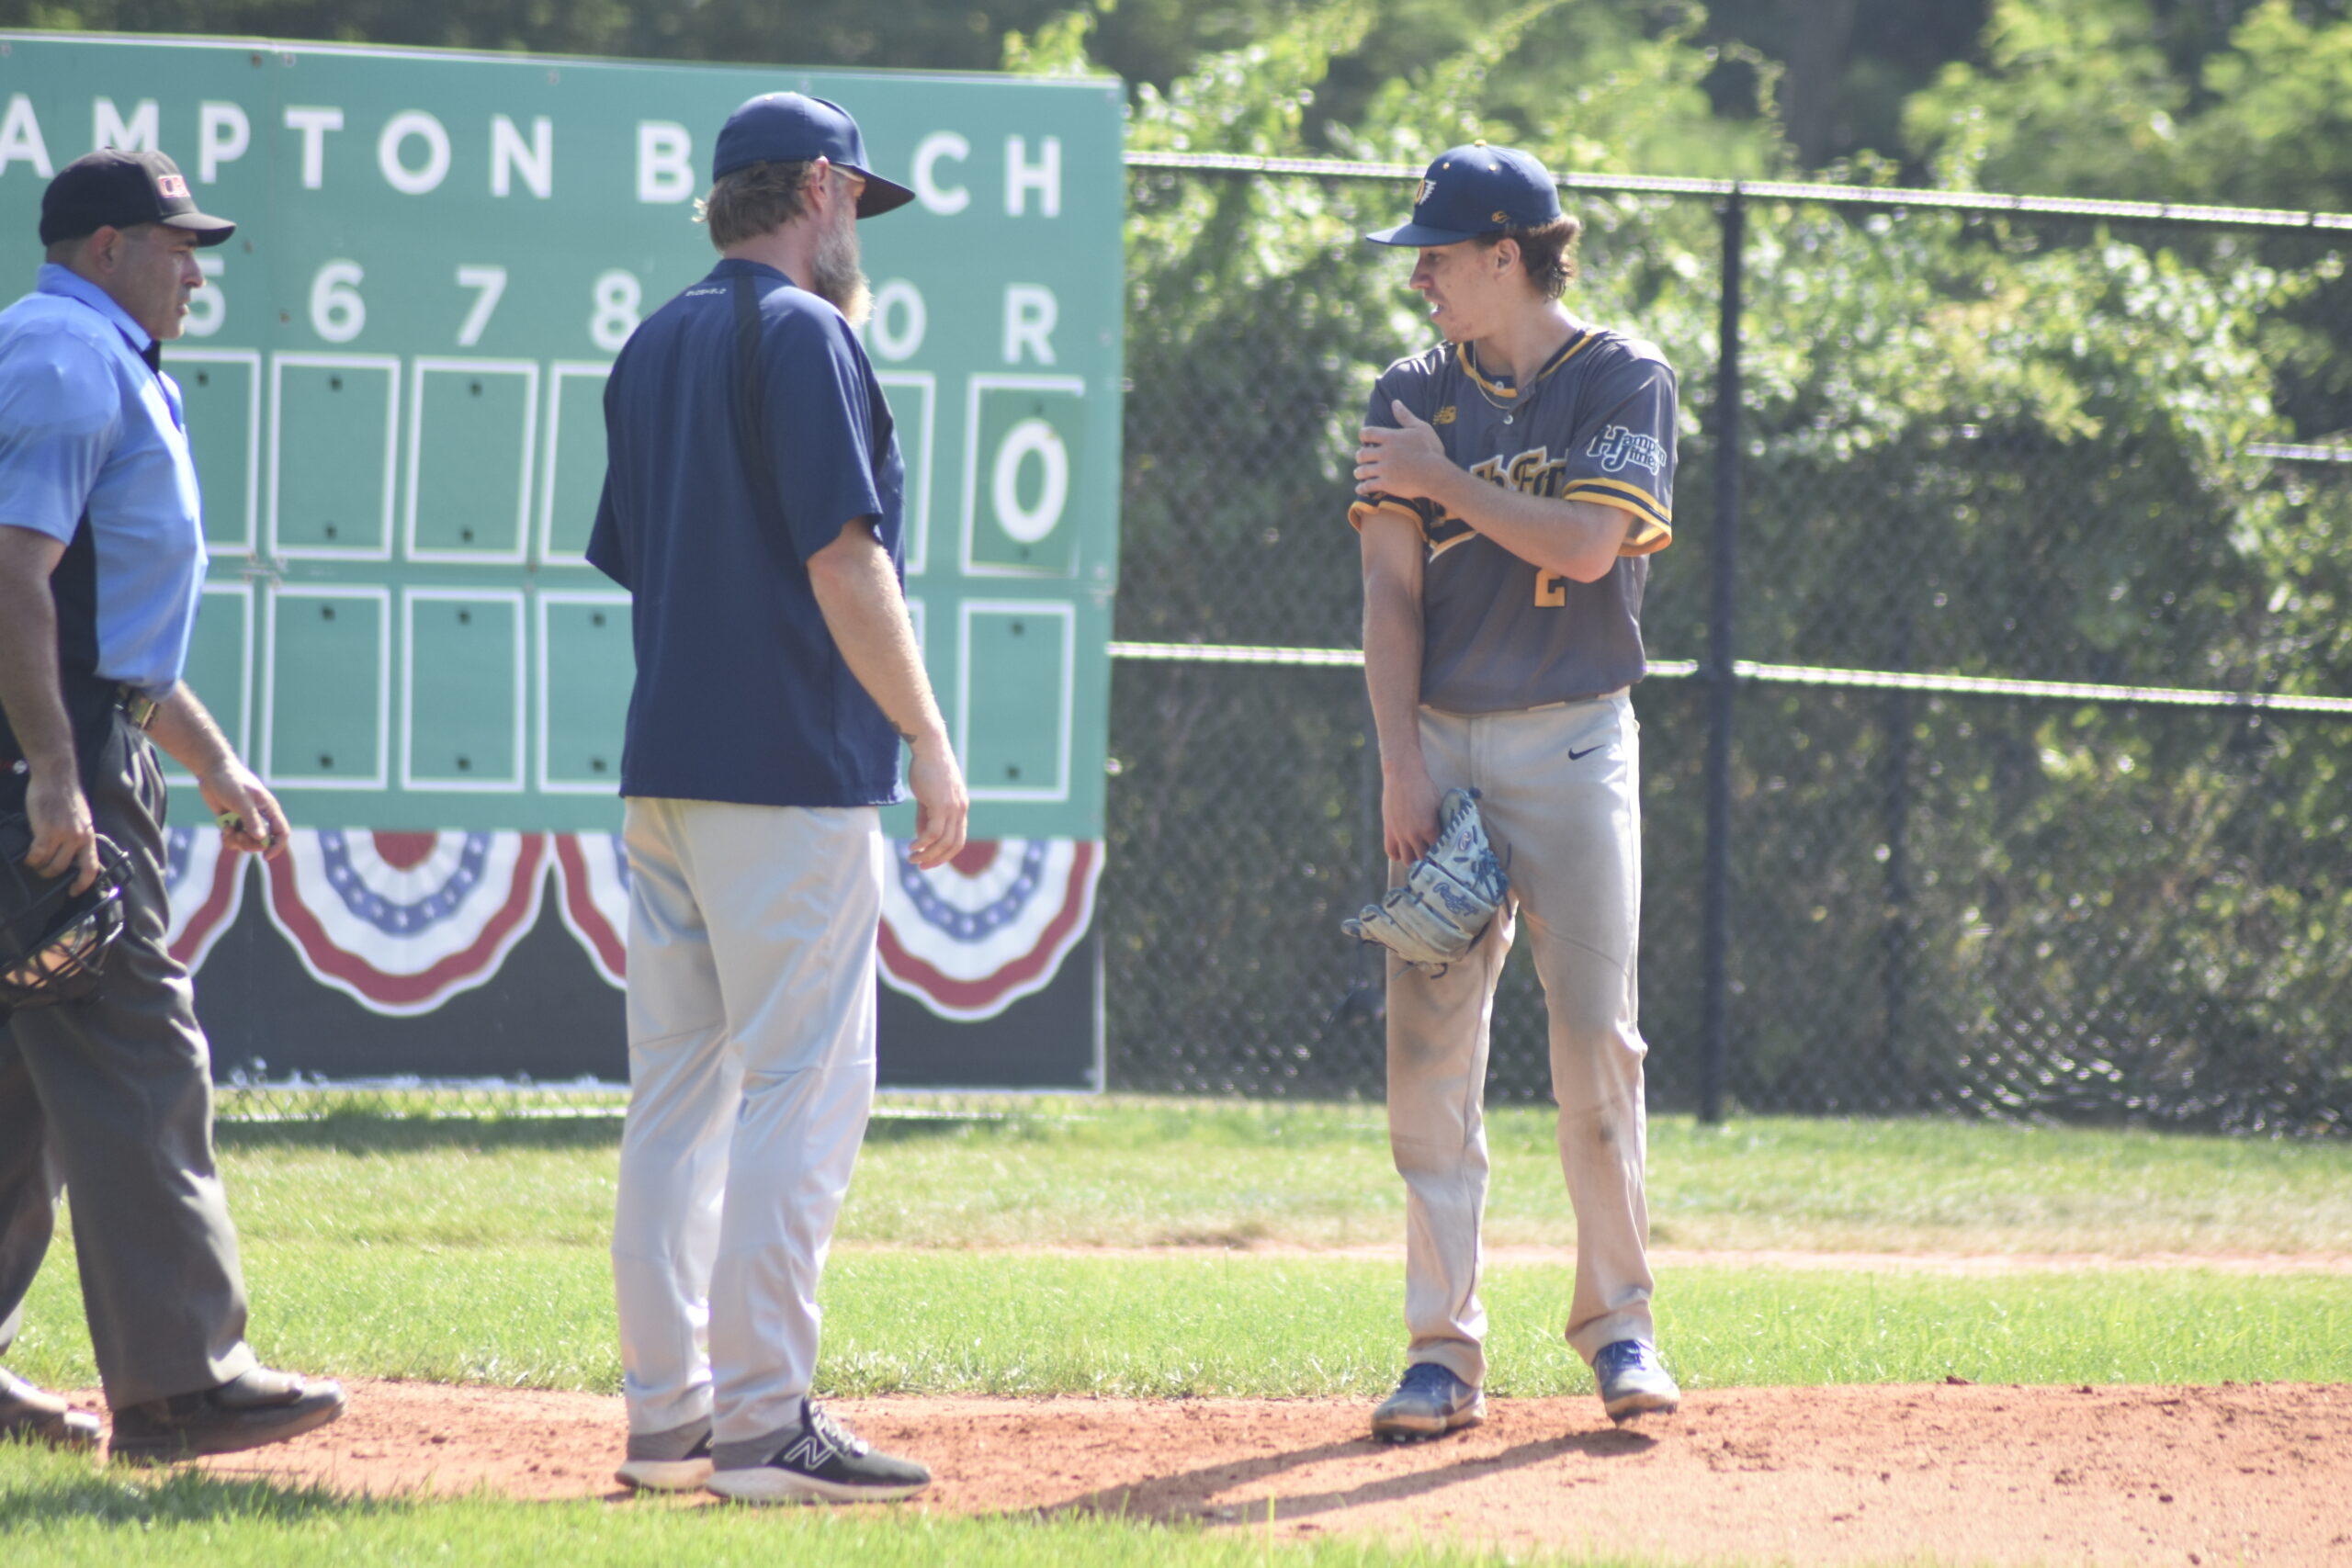 North Fork Ospreys manager Jeramiah Arneson checks out his starting pitcher Jake Halloran (Hofstra) after taking a line drive off his pitching arm.  Halloran stayed in the game and wound up throwing the first four innings.    DREW BUDD